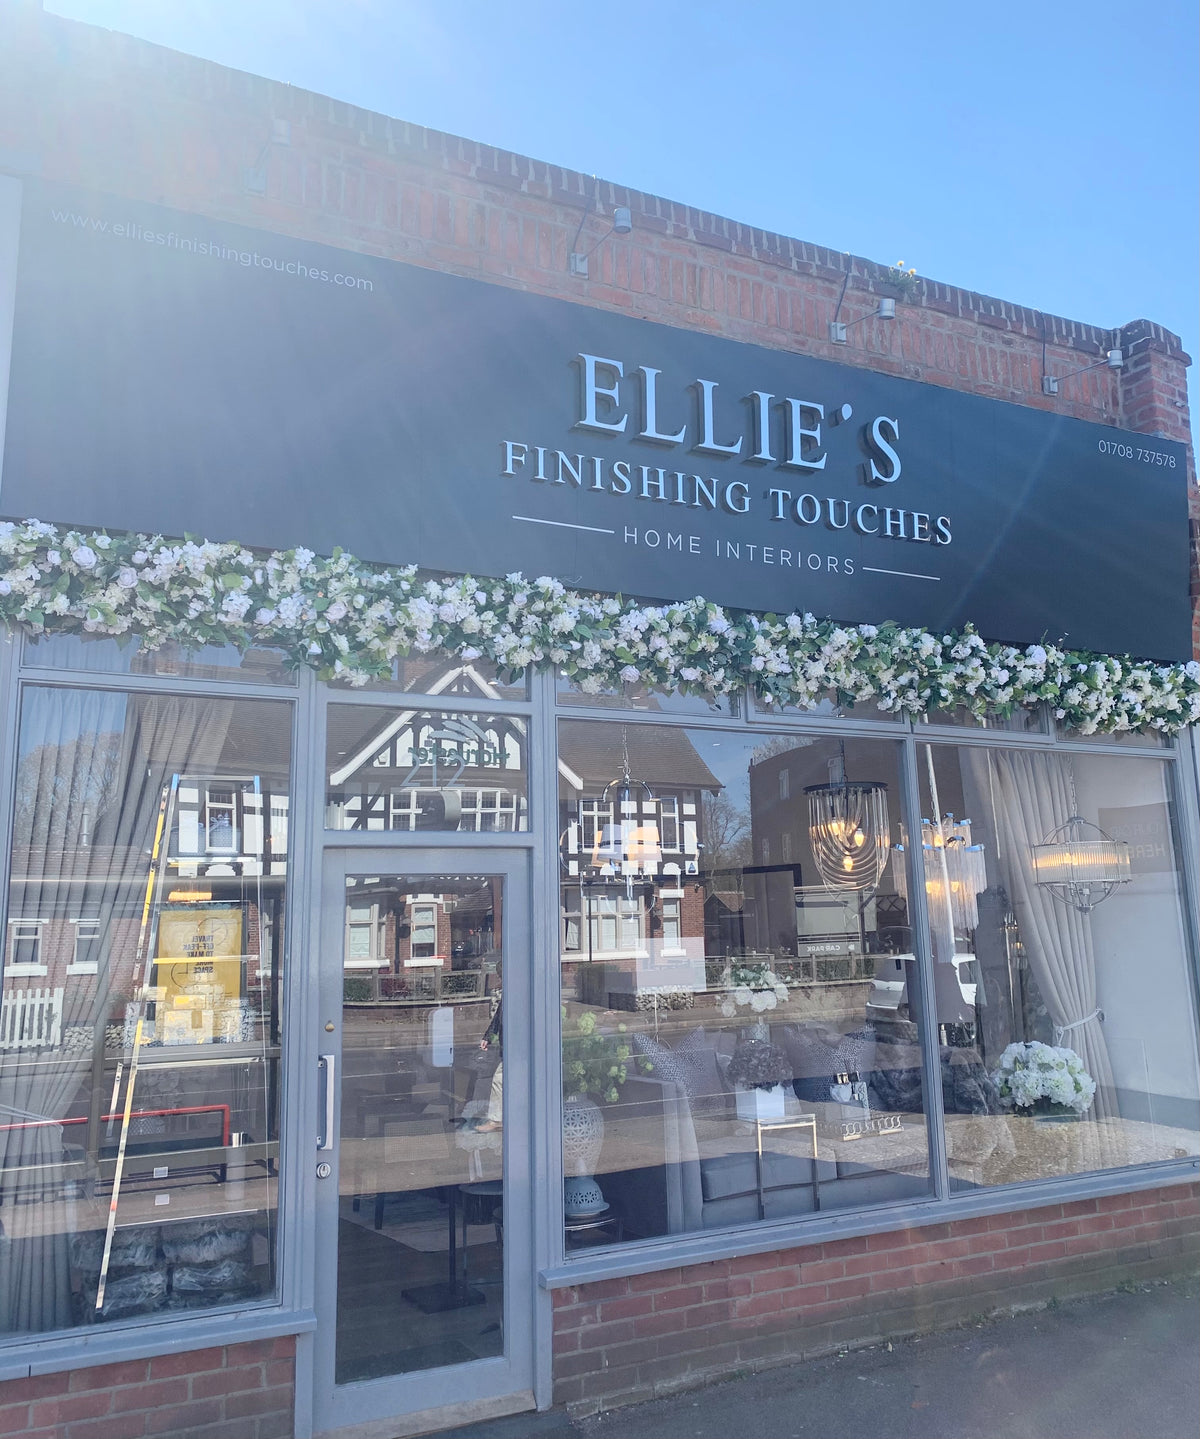 Ellie's Finishing Touches store front